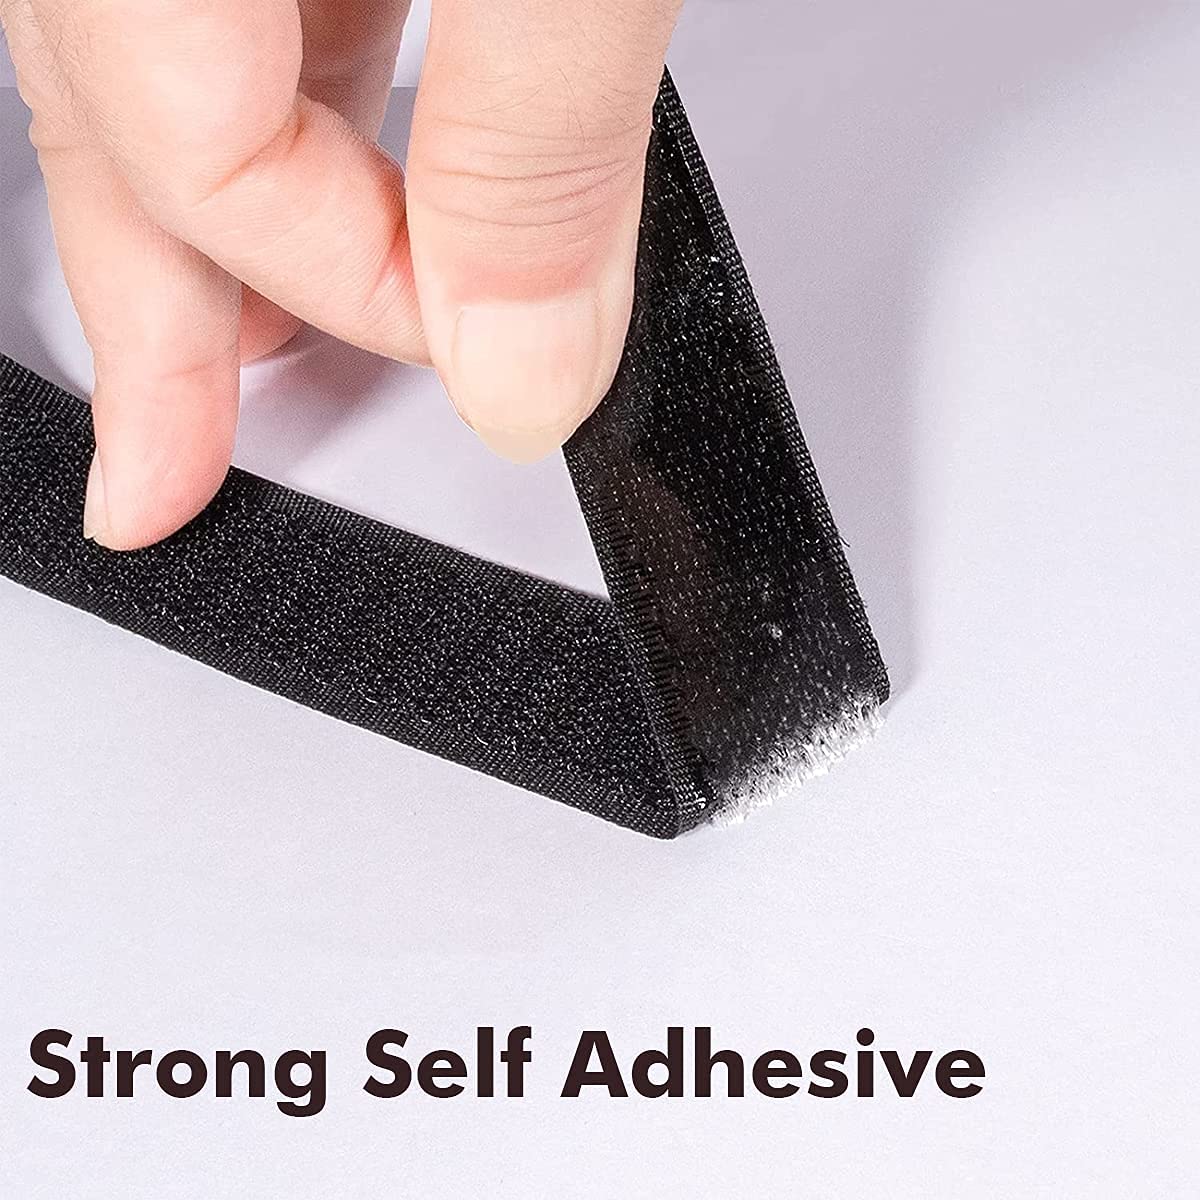 Self Adhesive Hook Tape Roll & Thumbnails for Magnetic Door & Window Net Replacement LifeKrafts